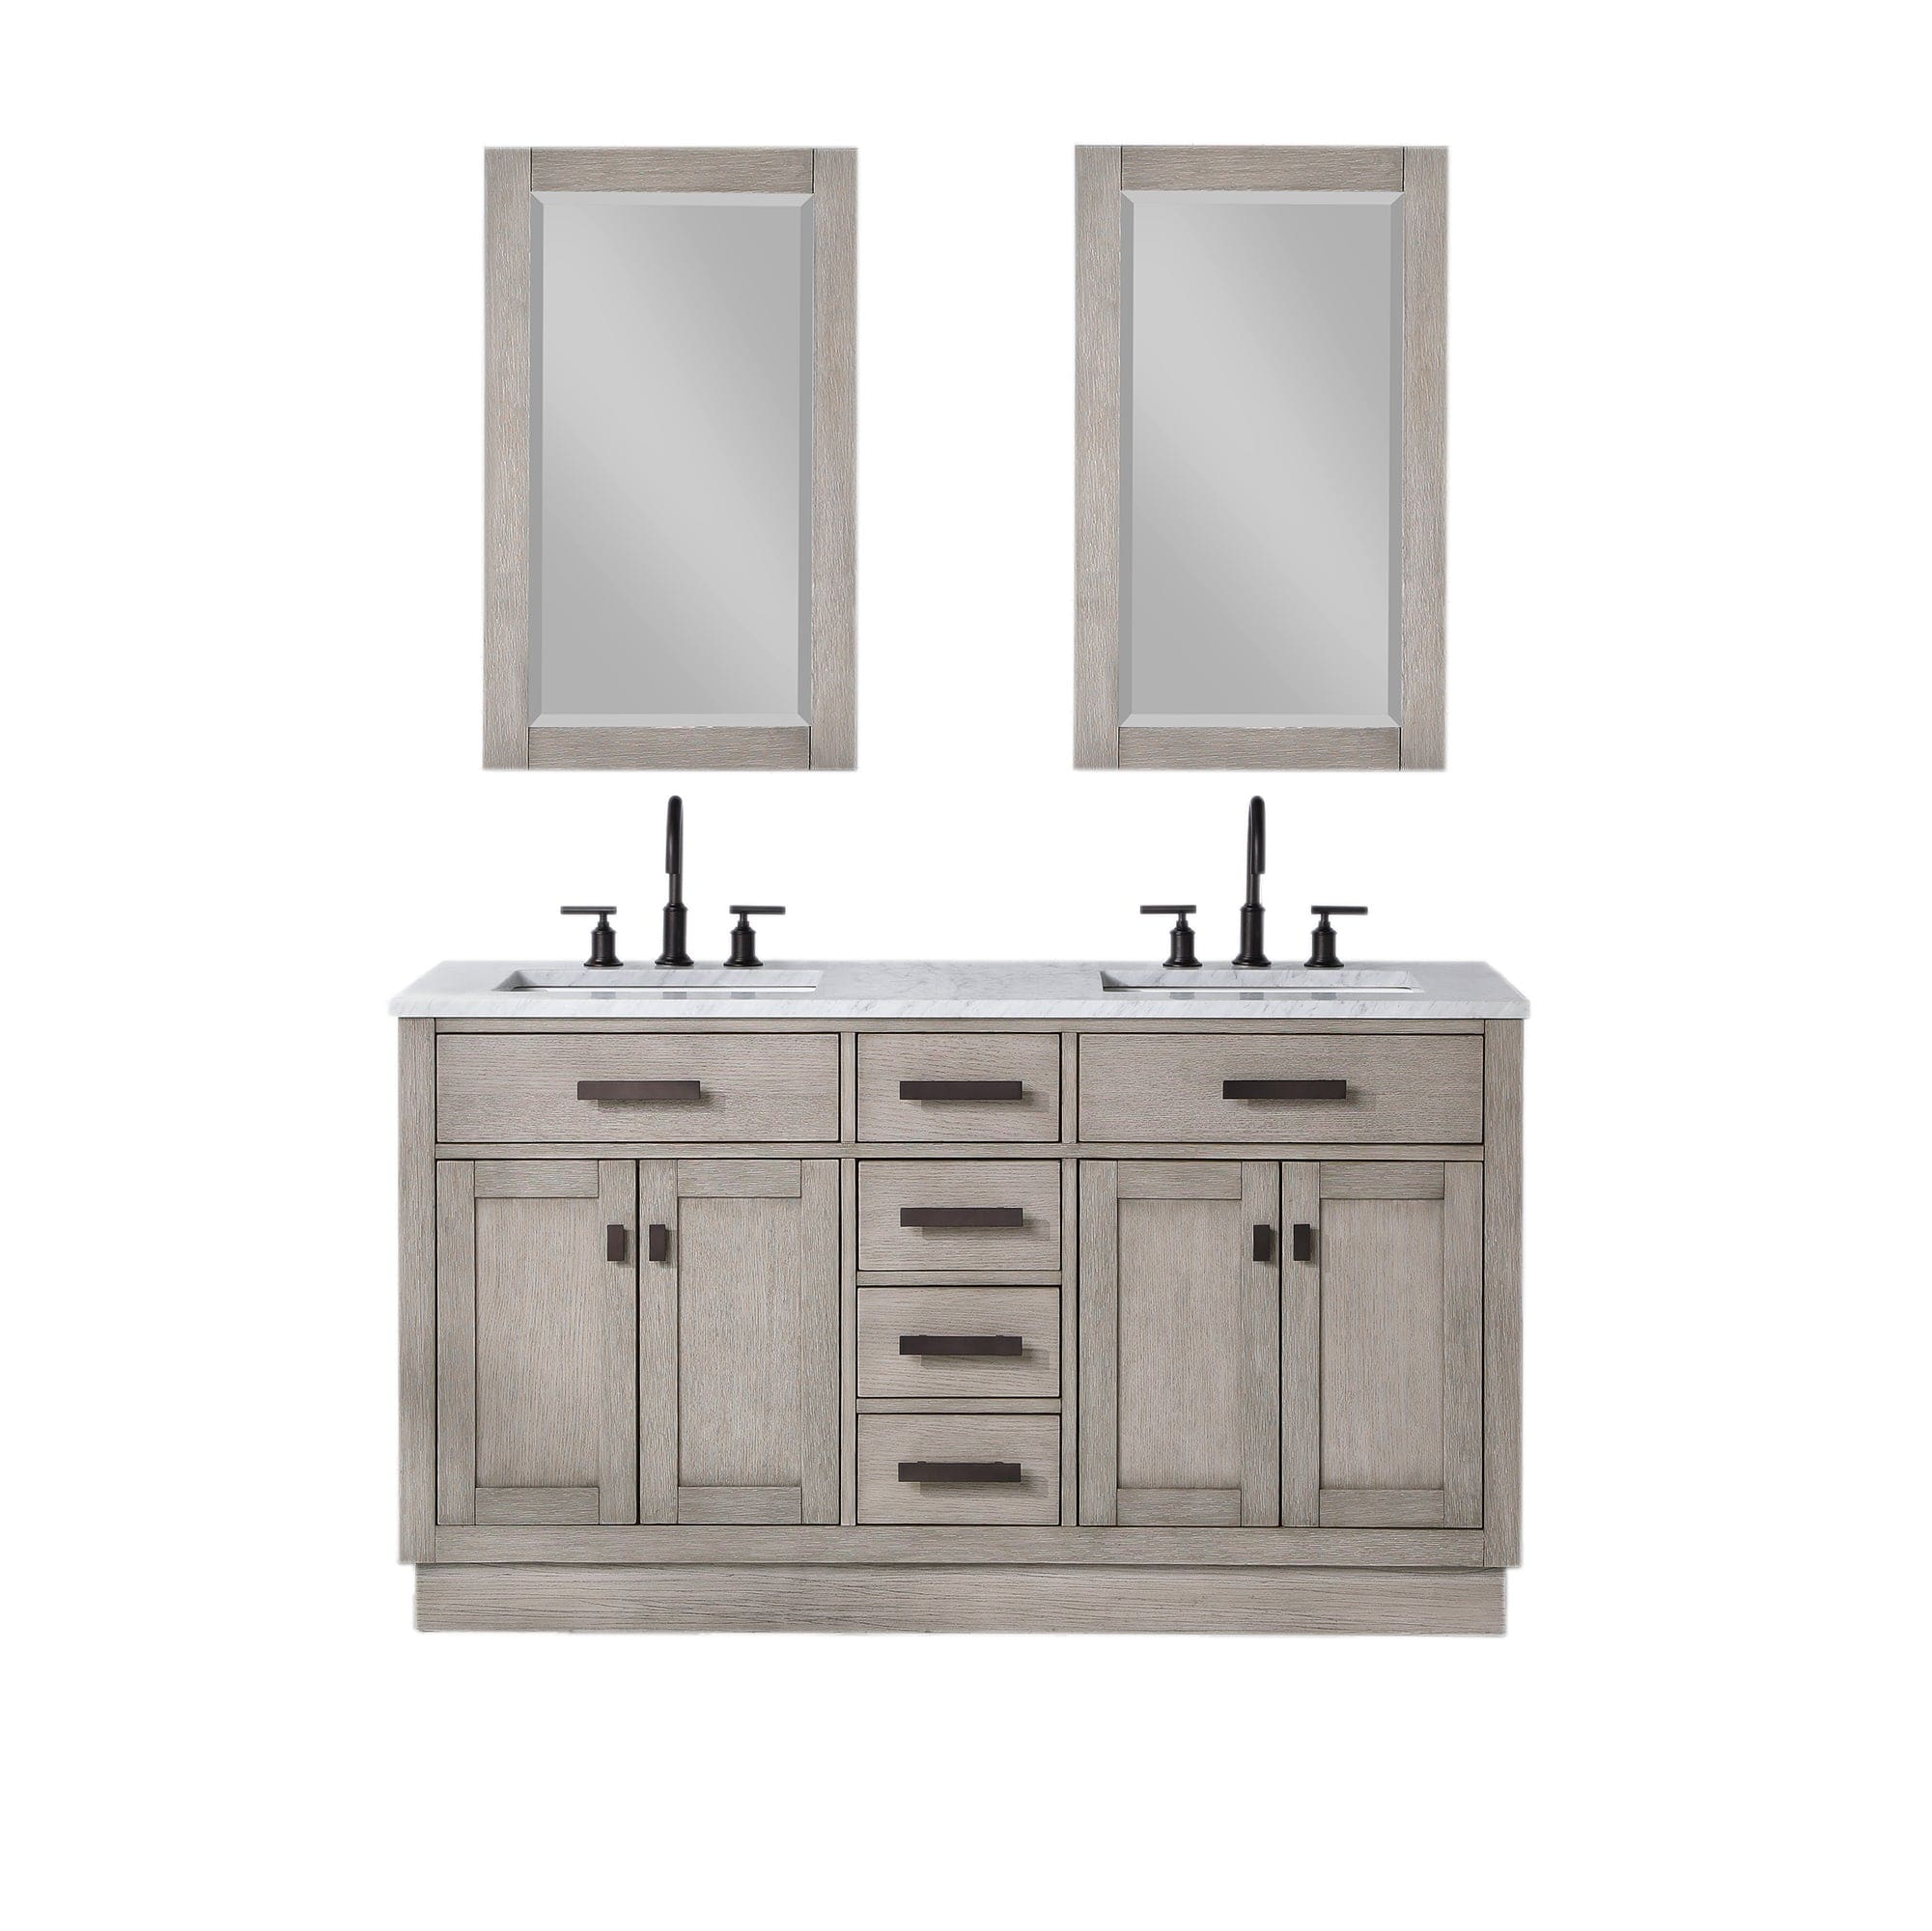 Chestnut 60 In. Double Sink Carrara White Marble Countertop Vanity In Grey Oak with Grooseneck Faucets and Mirrors - Molaix732030764835CH60CW03GK-R21BL1403